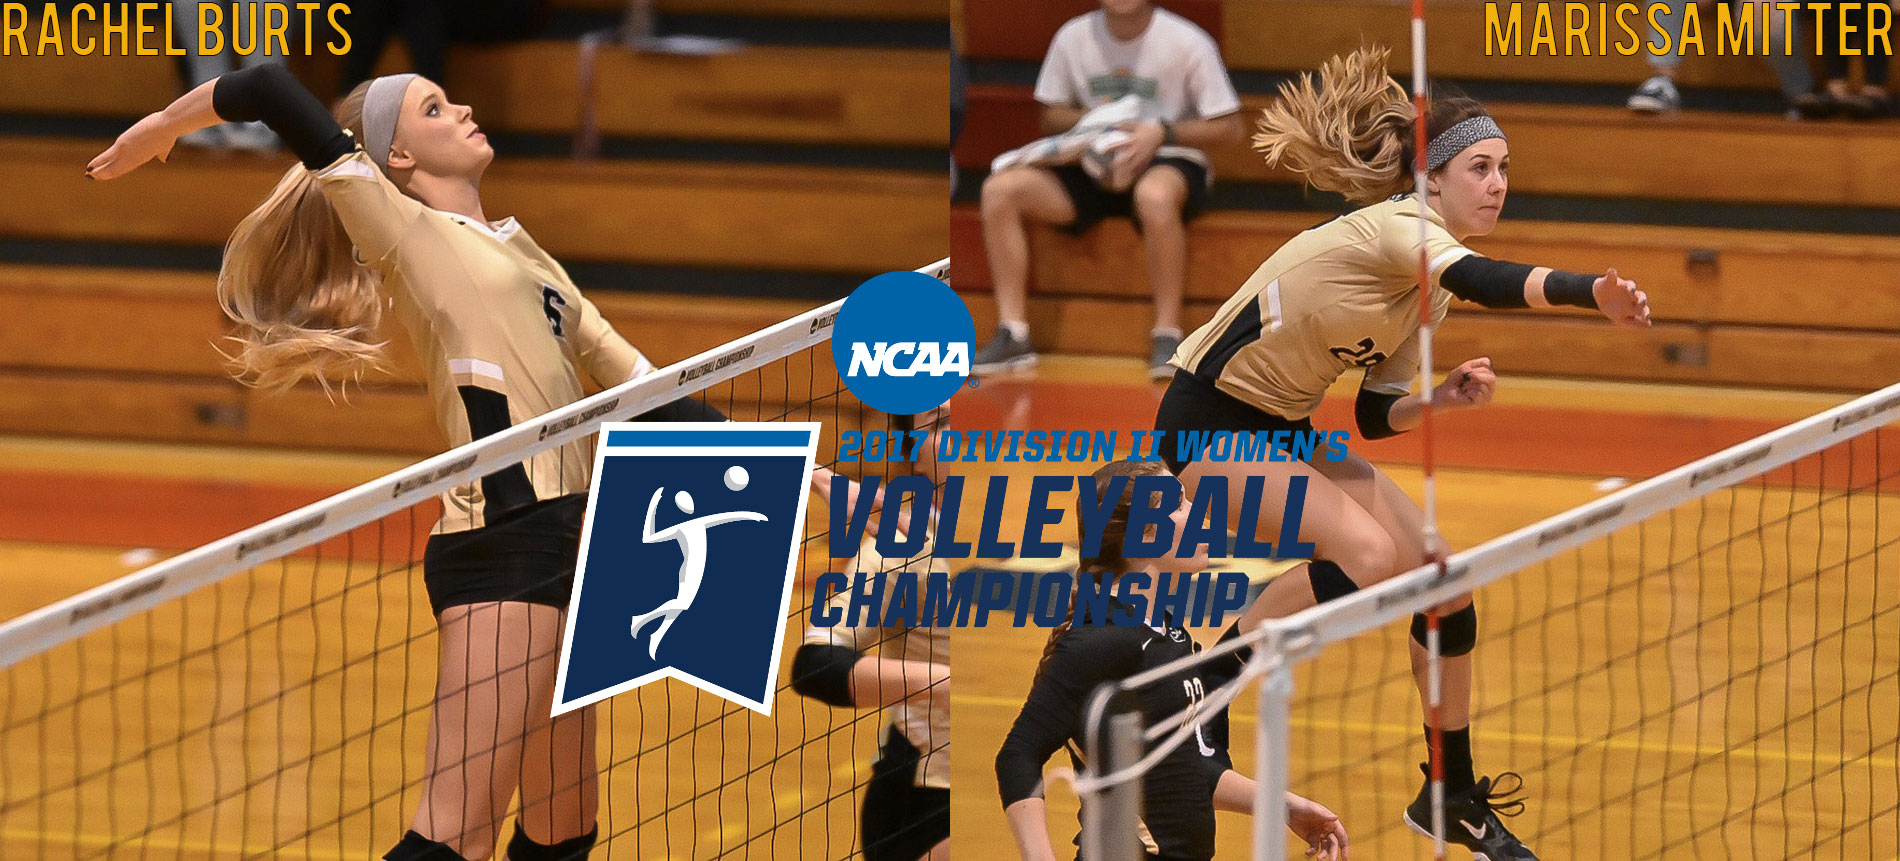 Burts and Mitter Named to NCAA Southeast Region All-Tournament Team